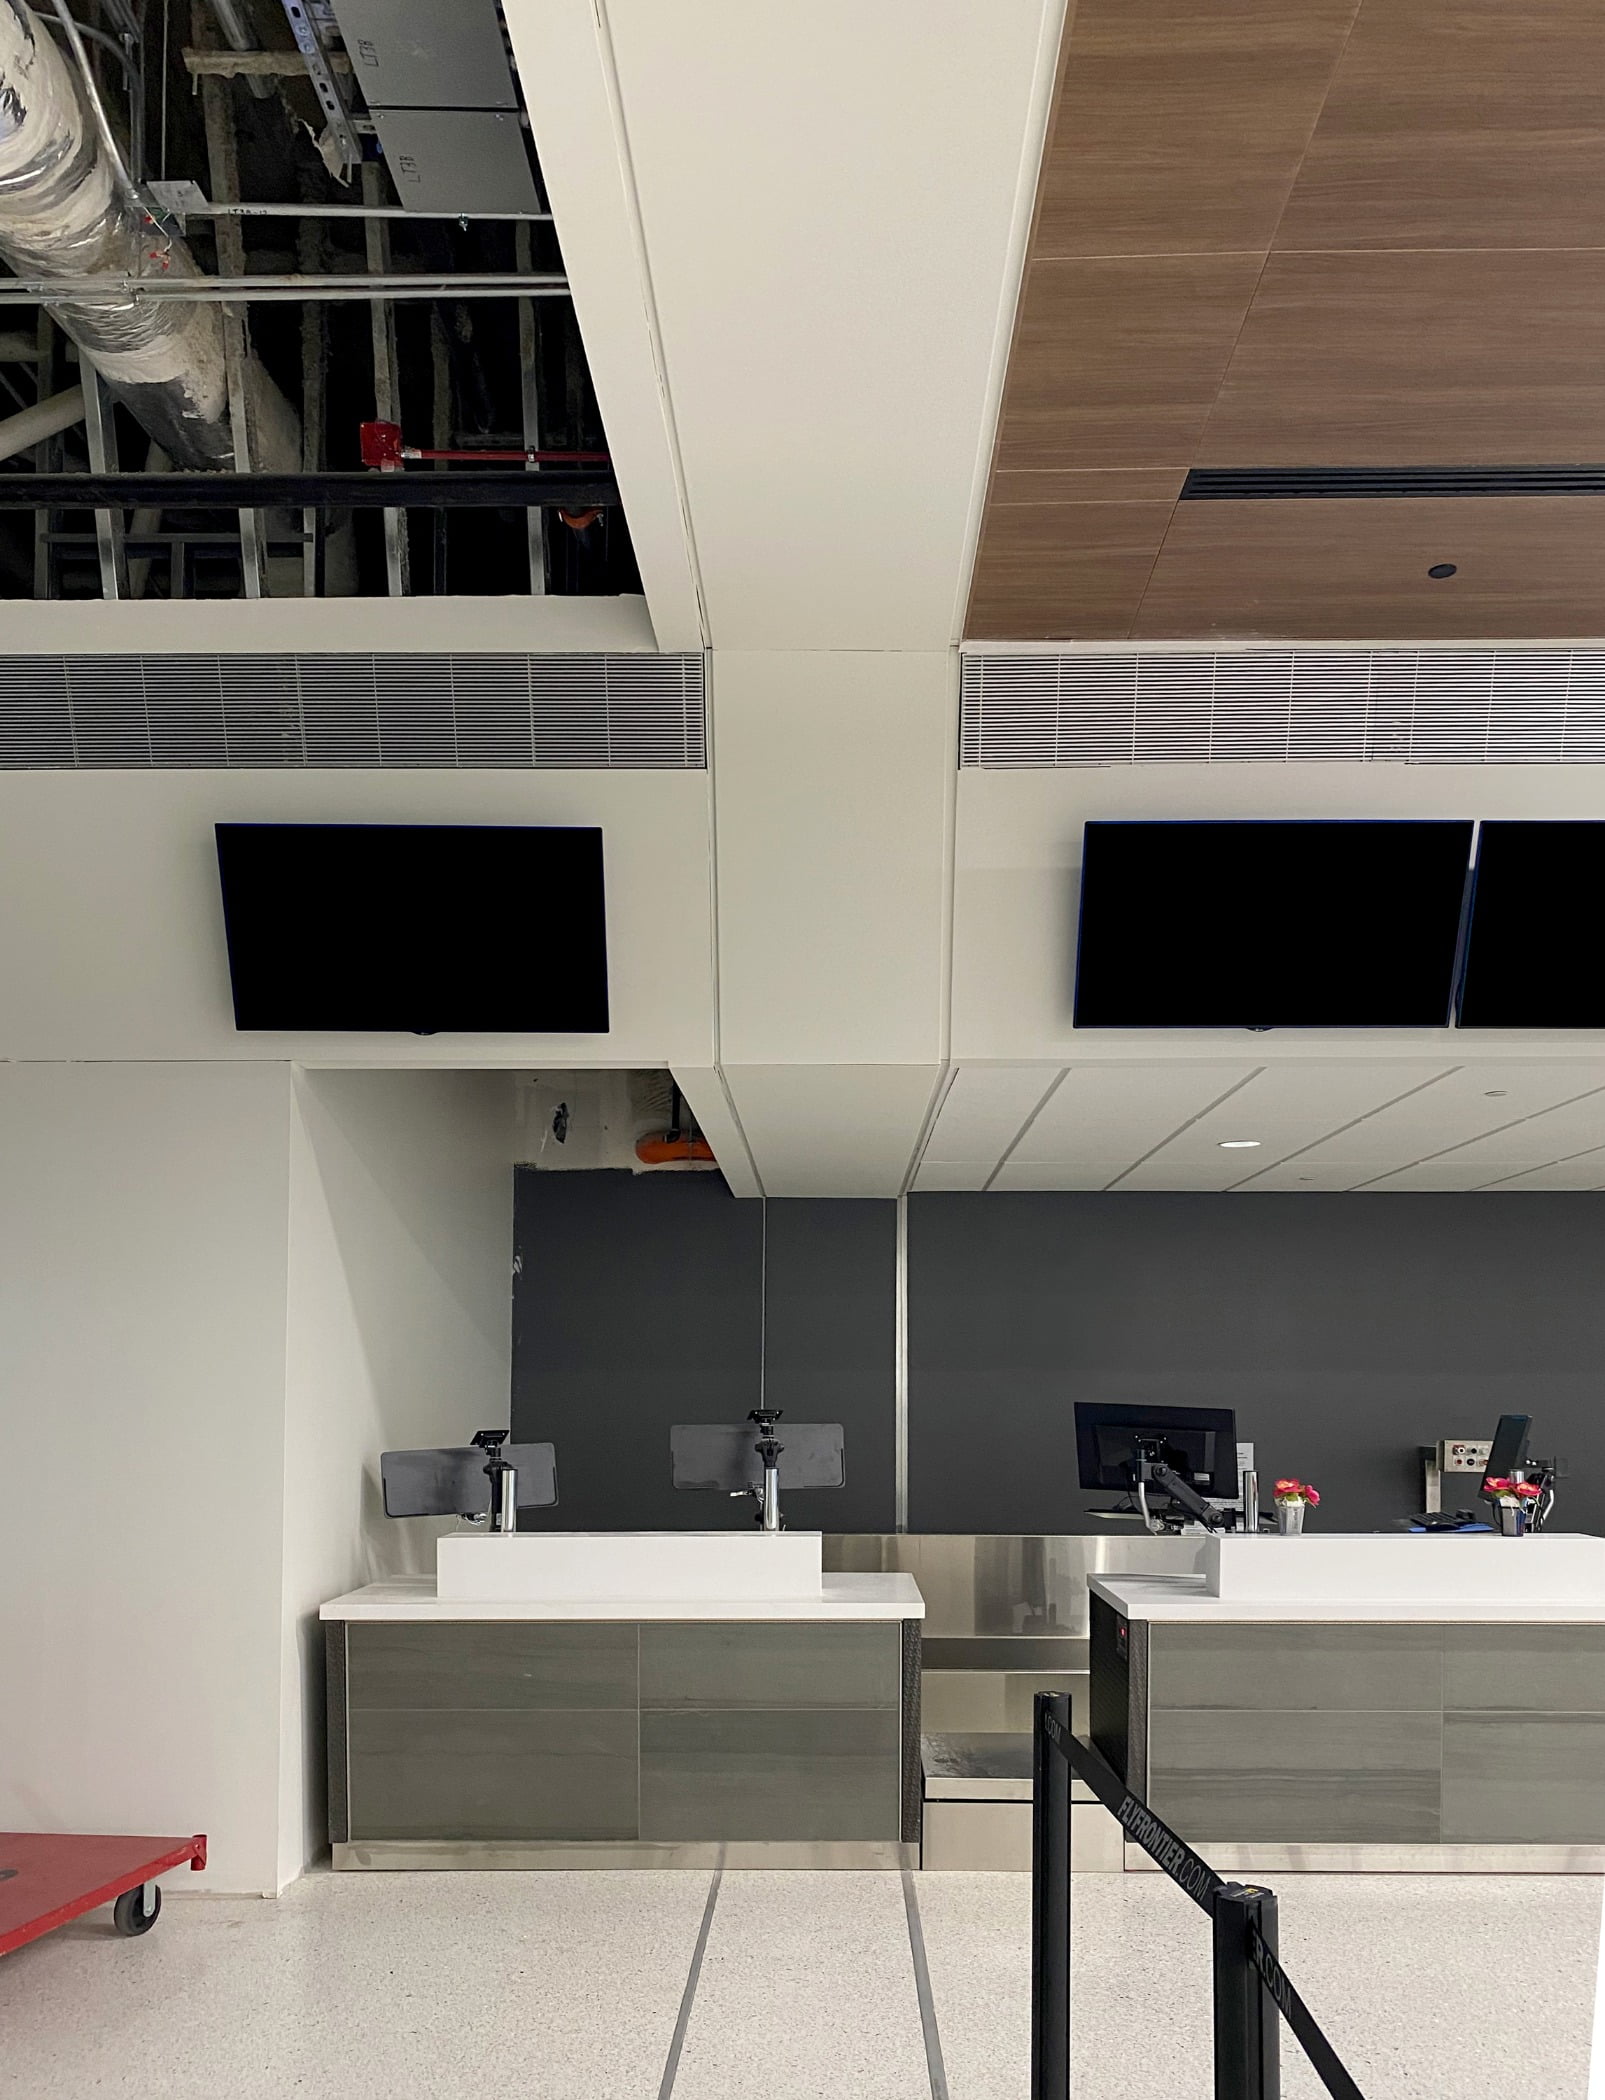 Finished construction near the Frontier Service Desk located in the North Terminal highlights how Balco expansion joint covers provide a matching aesthetic using the PJC floor and FCC wall to soffit and ceiling.